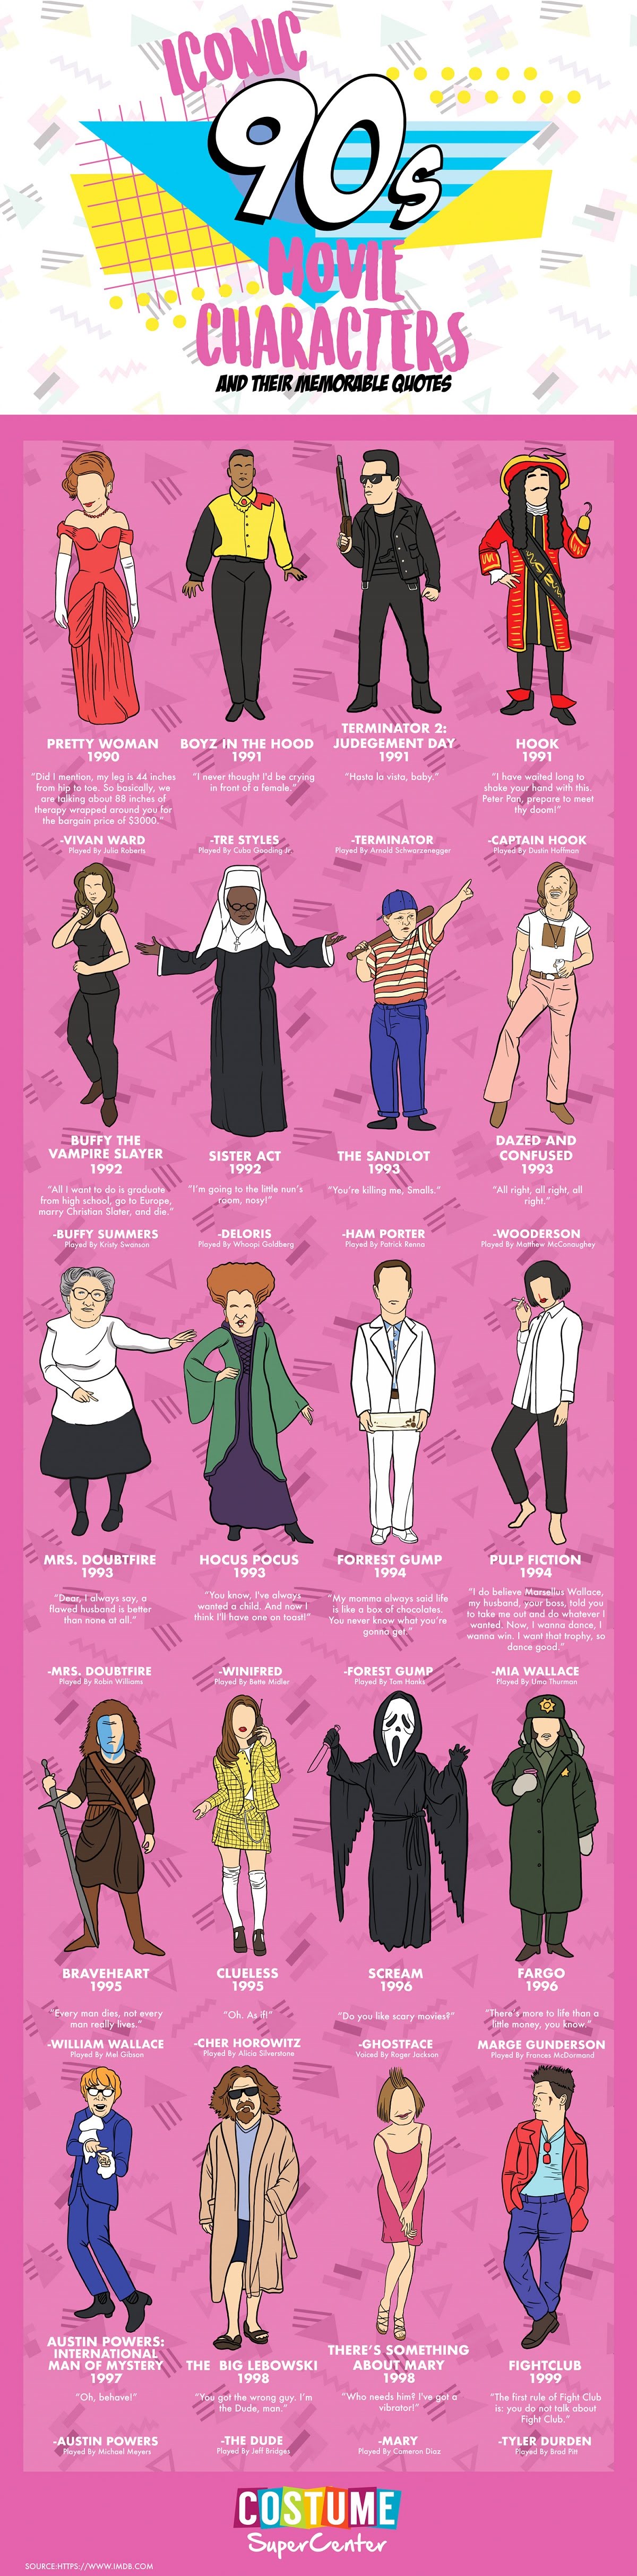 The Best Movie Quotes from the ’90s #infographic